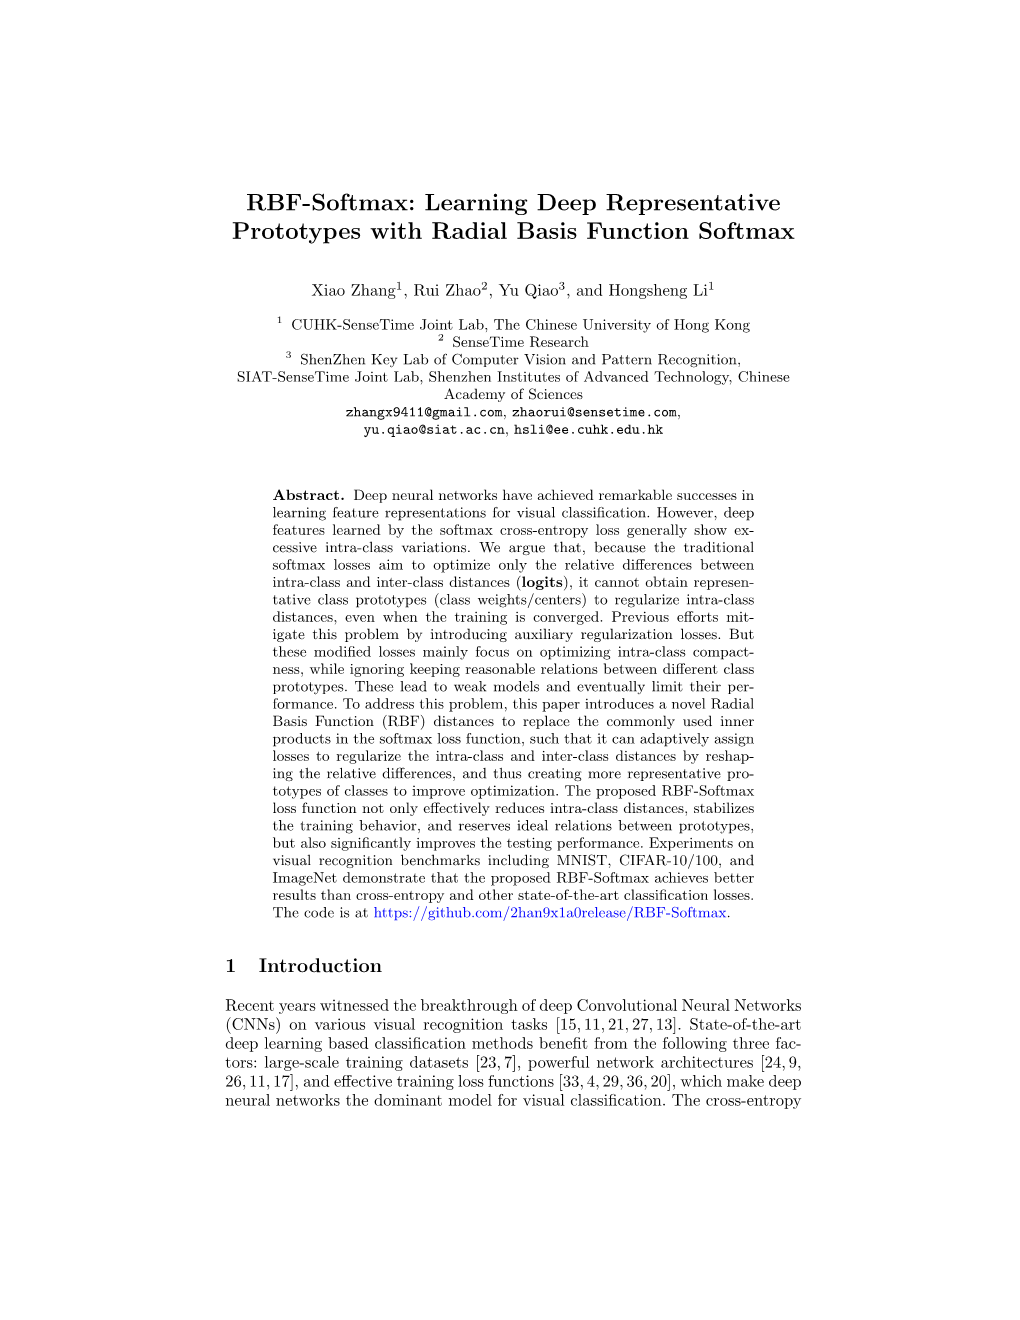 RBF-Softmax: Learning Deep Representative Prototypes with Radial Basis Function Softmax